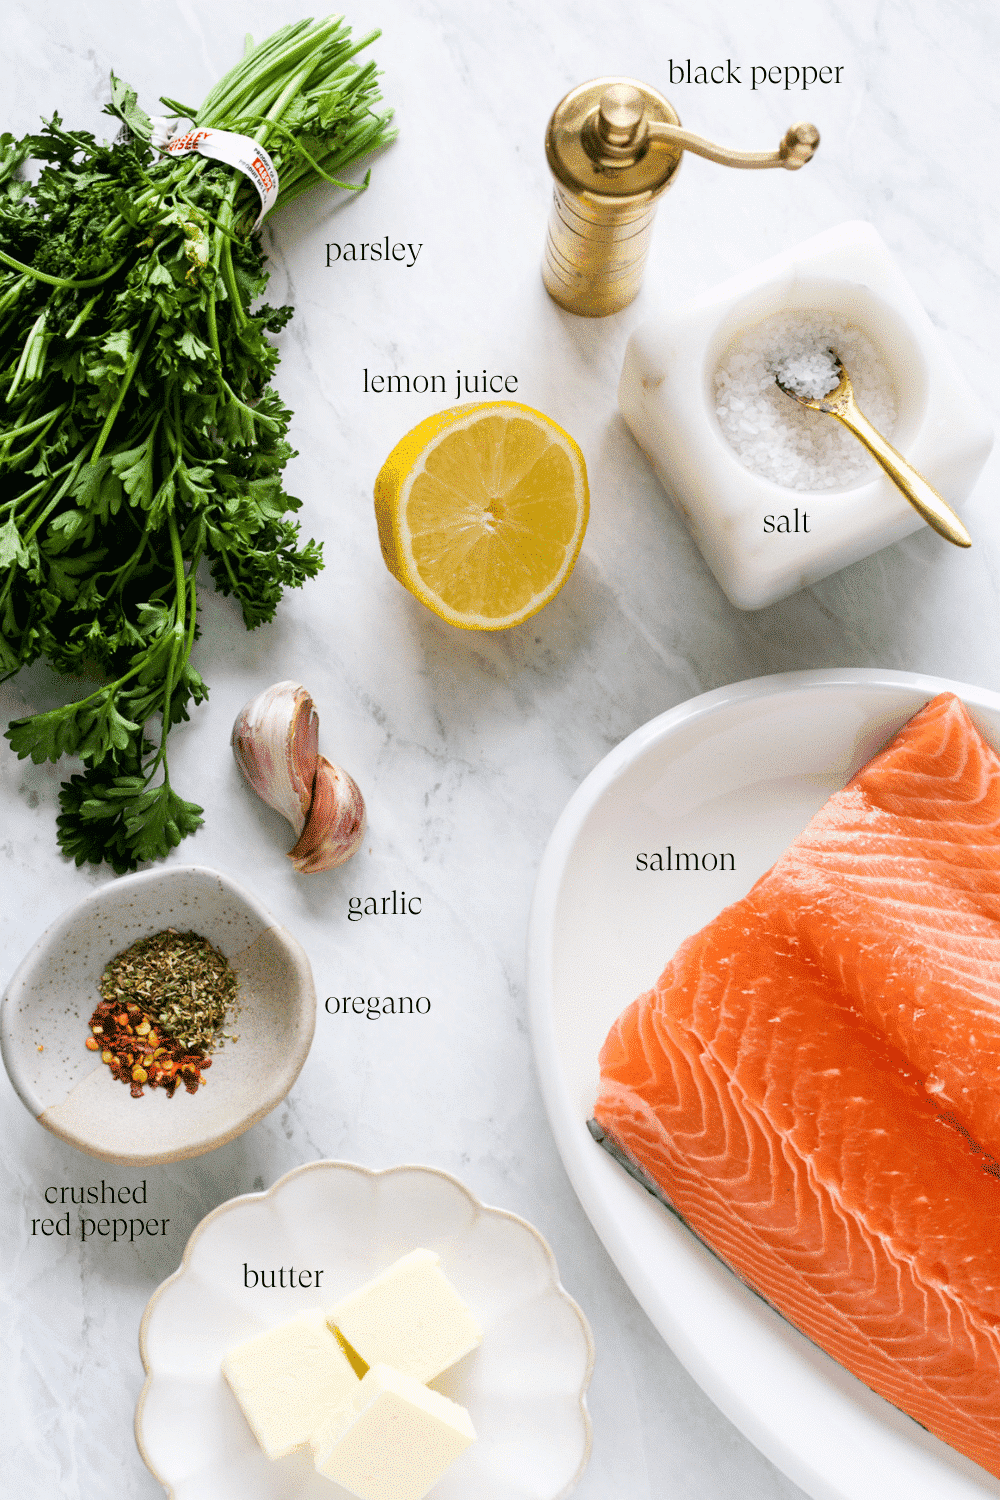 Ingredients for baked salmon recipe